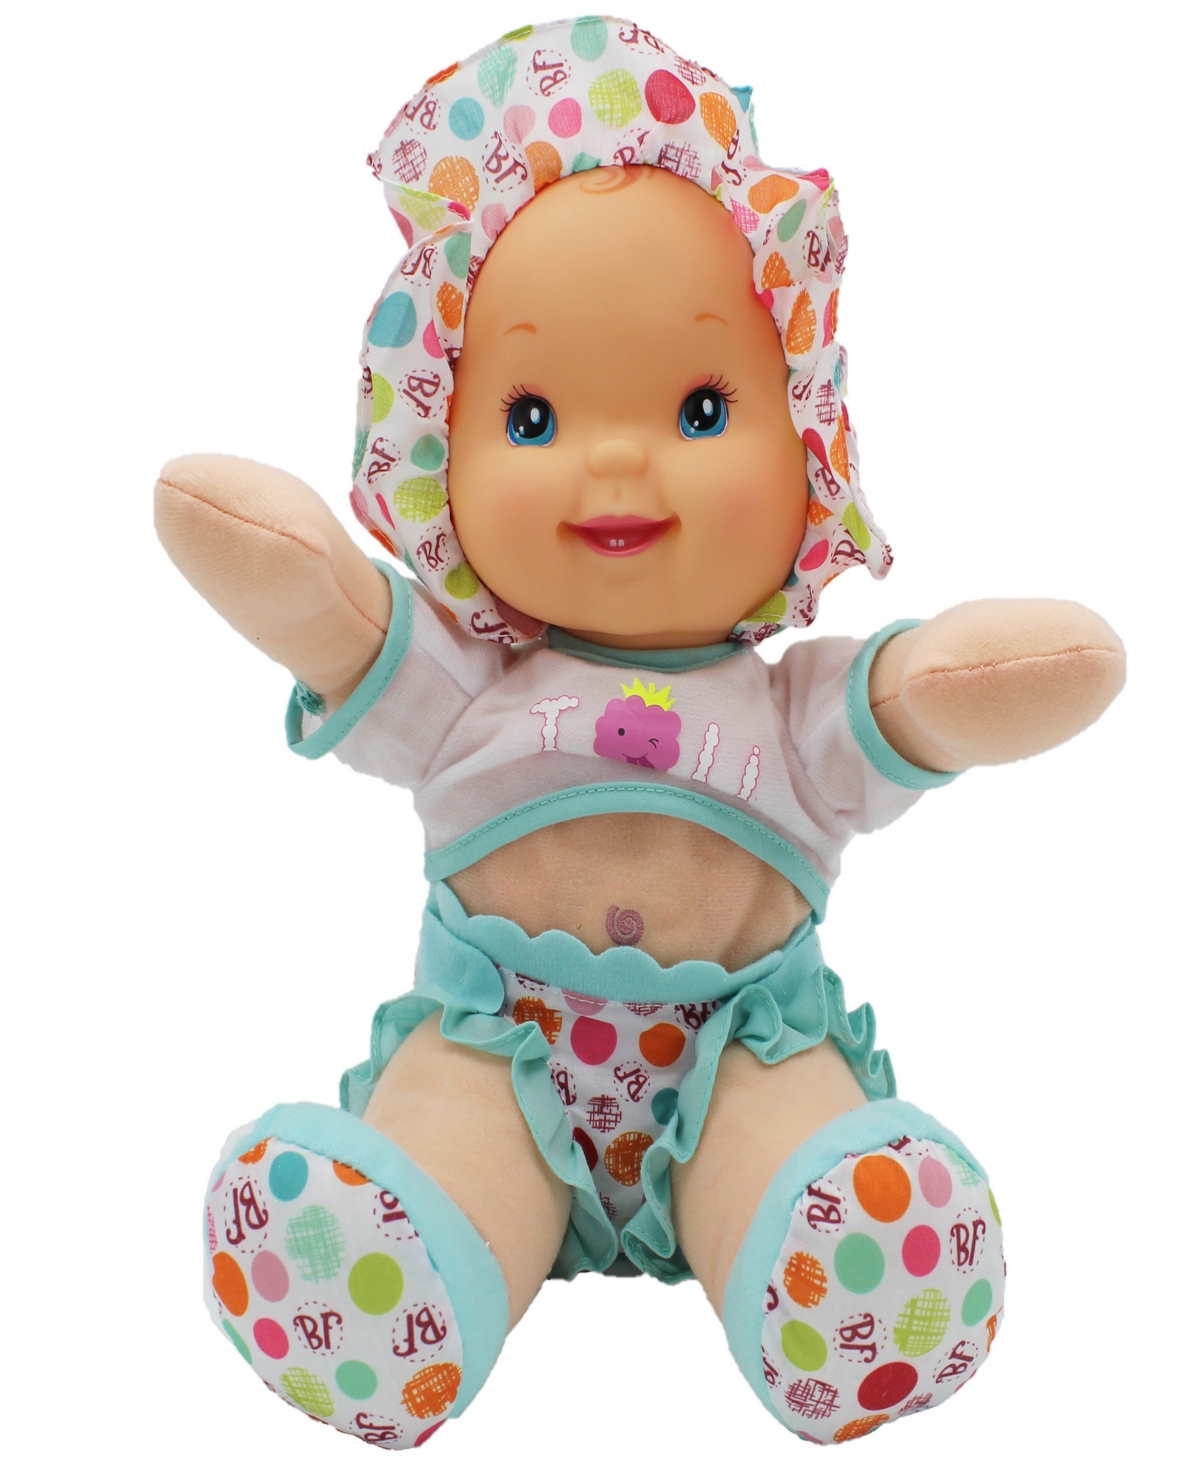 Baby's First By Nemcor Babies' Goldberger Doll Smartie Pants Doll With Raspberry White T-shirt In Multi